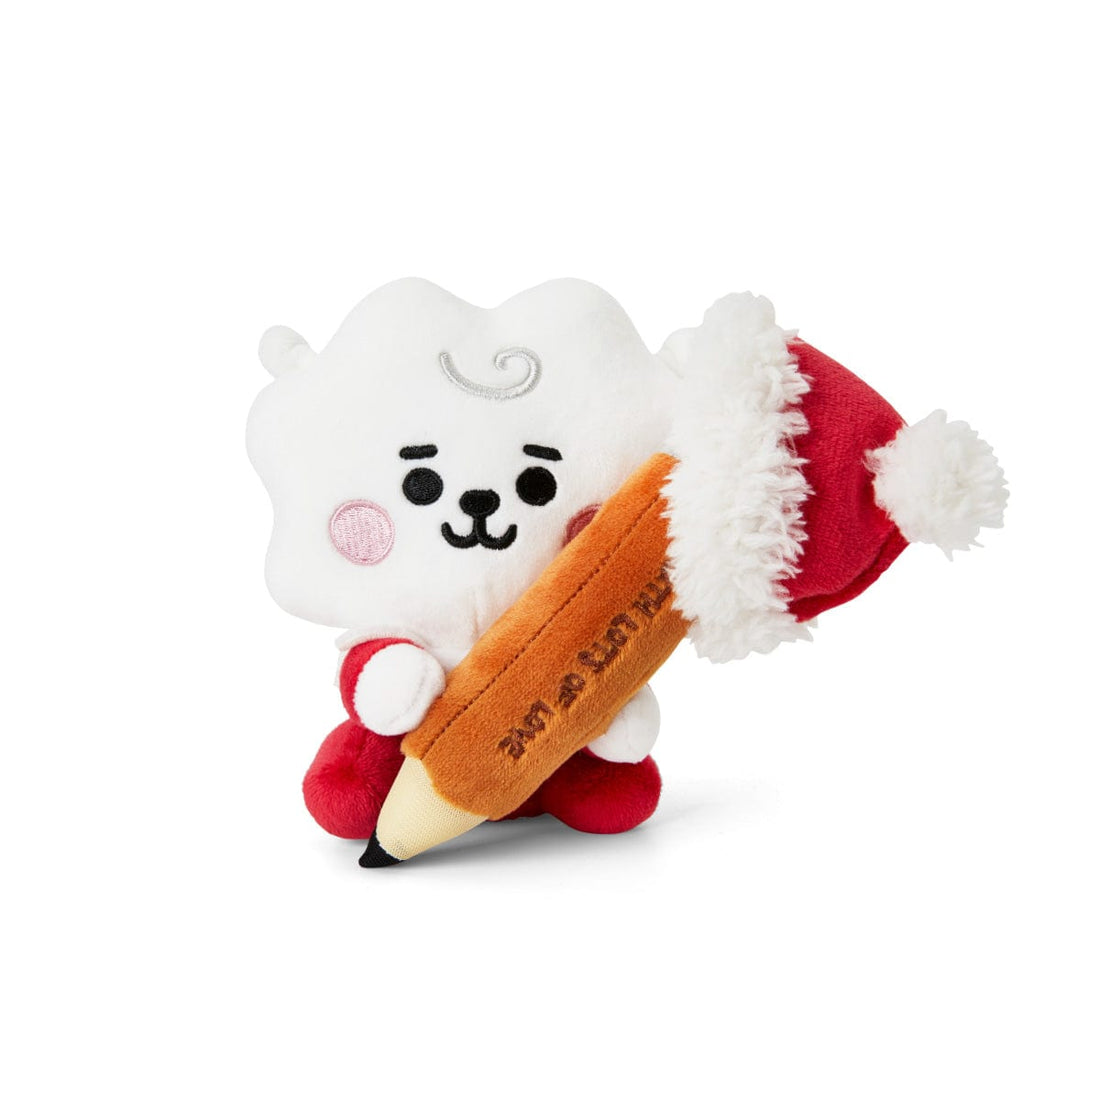 LINE FRIENDS TOYS RJ BT21 RJ BABY HOLIDAY MINI STANDING DOLL